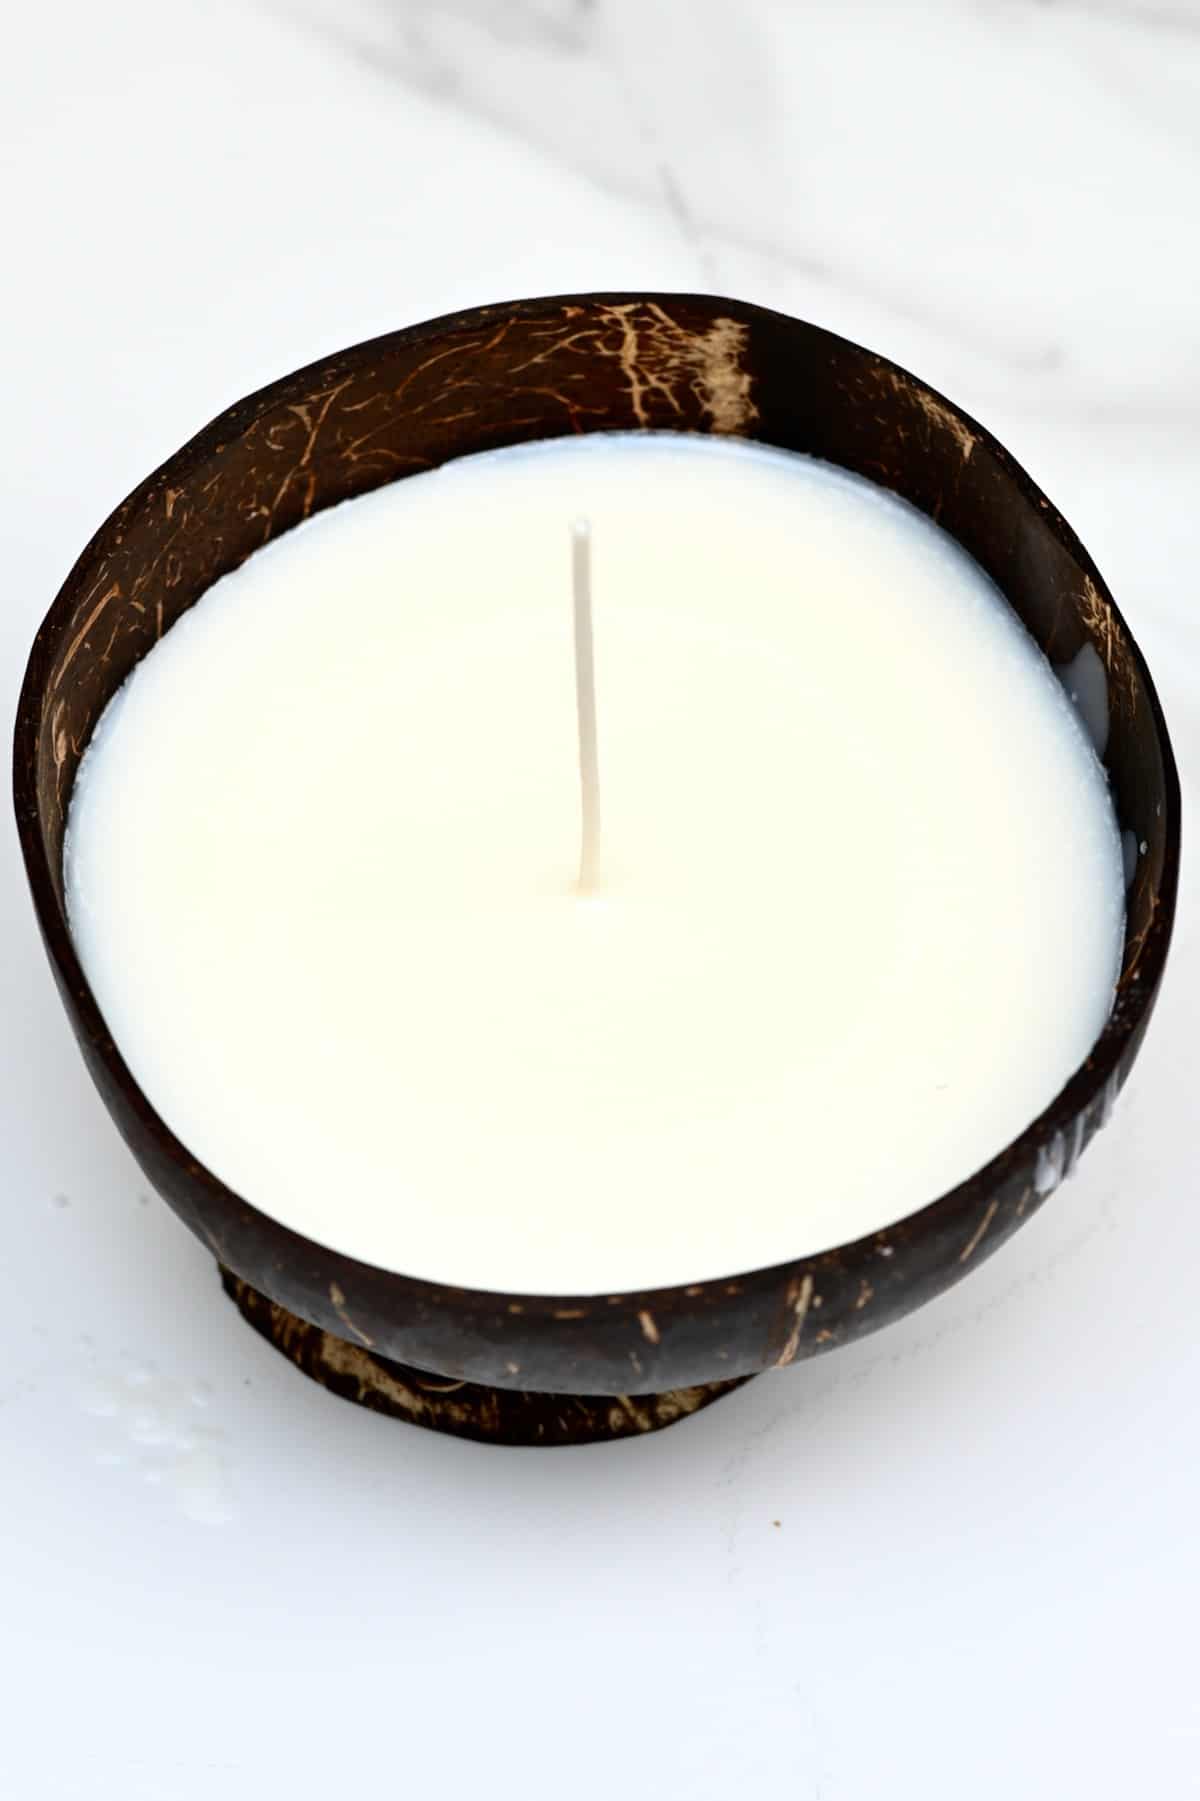 Homemade candle in a coconut bowl